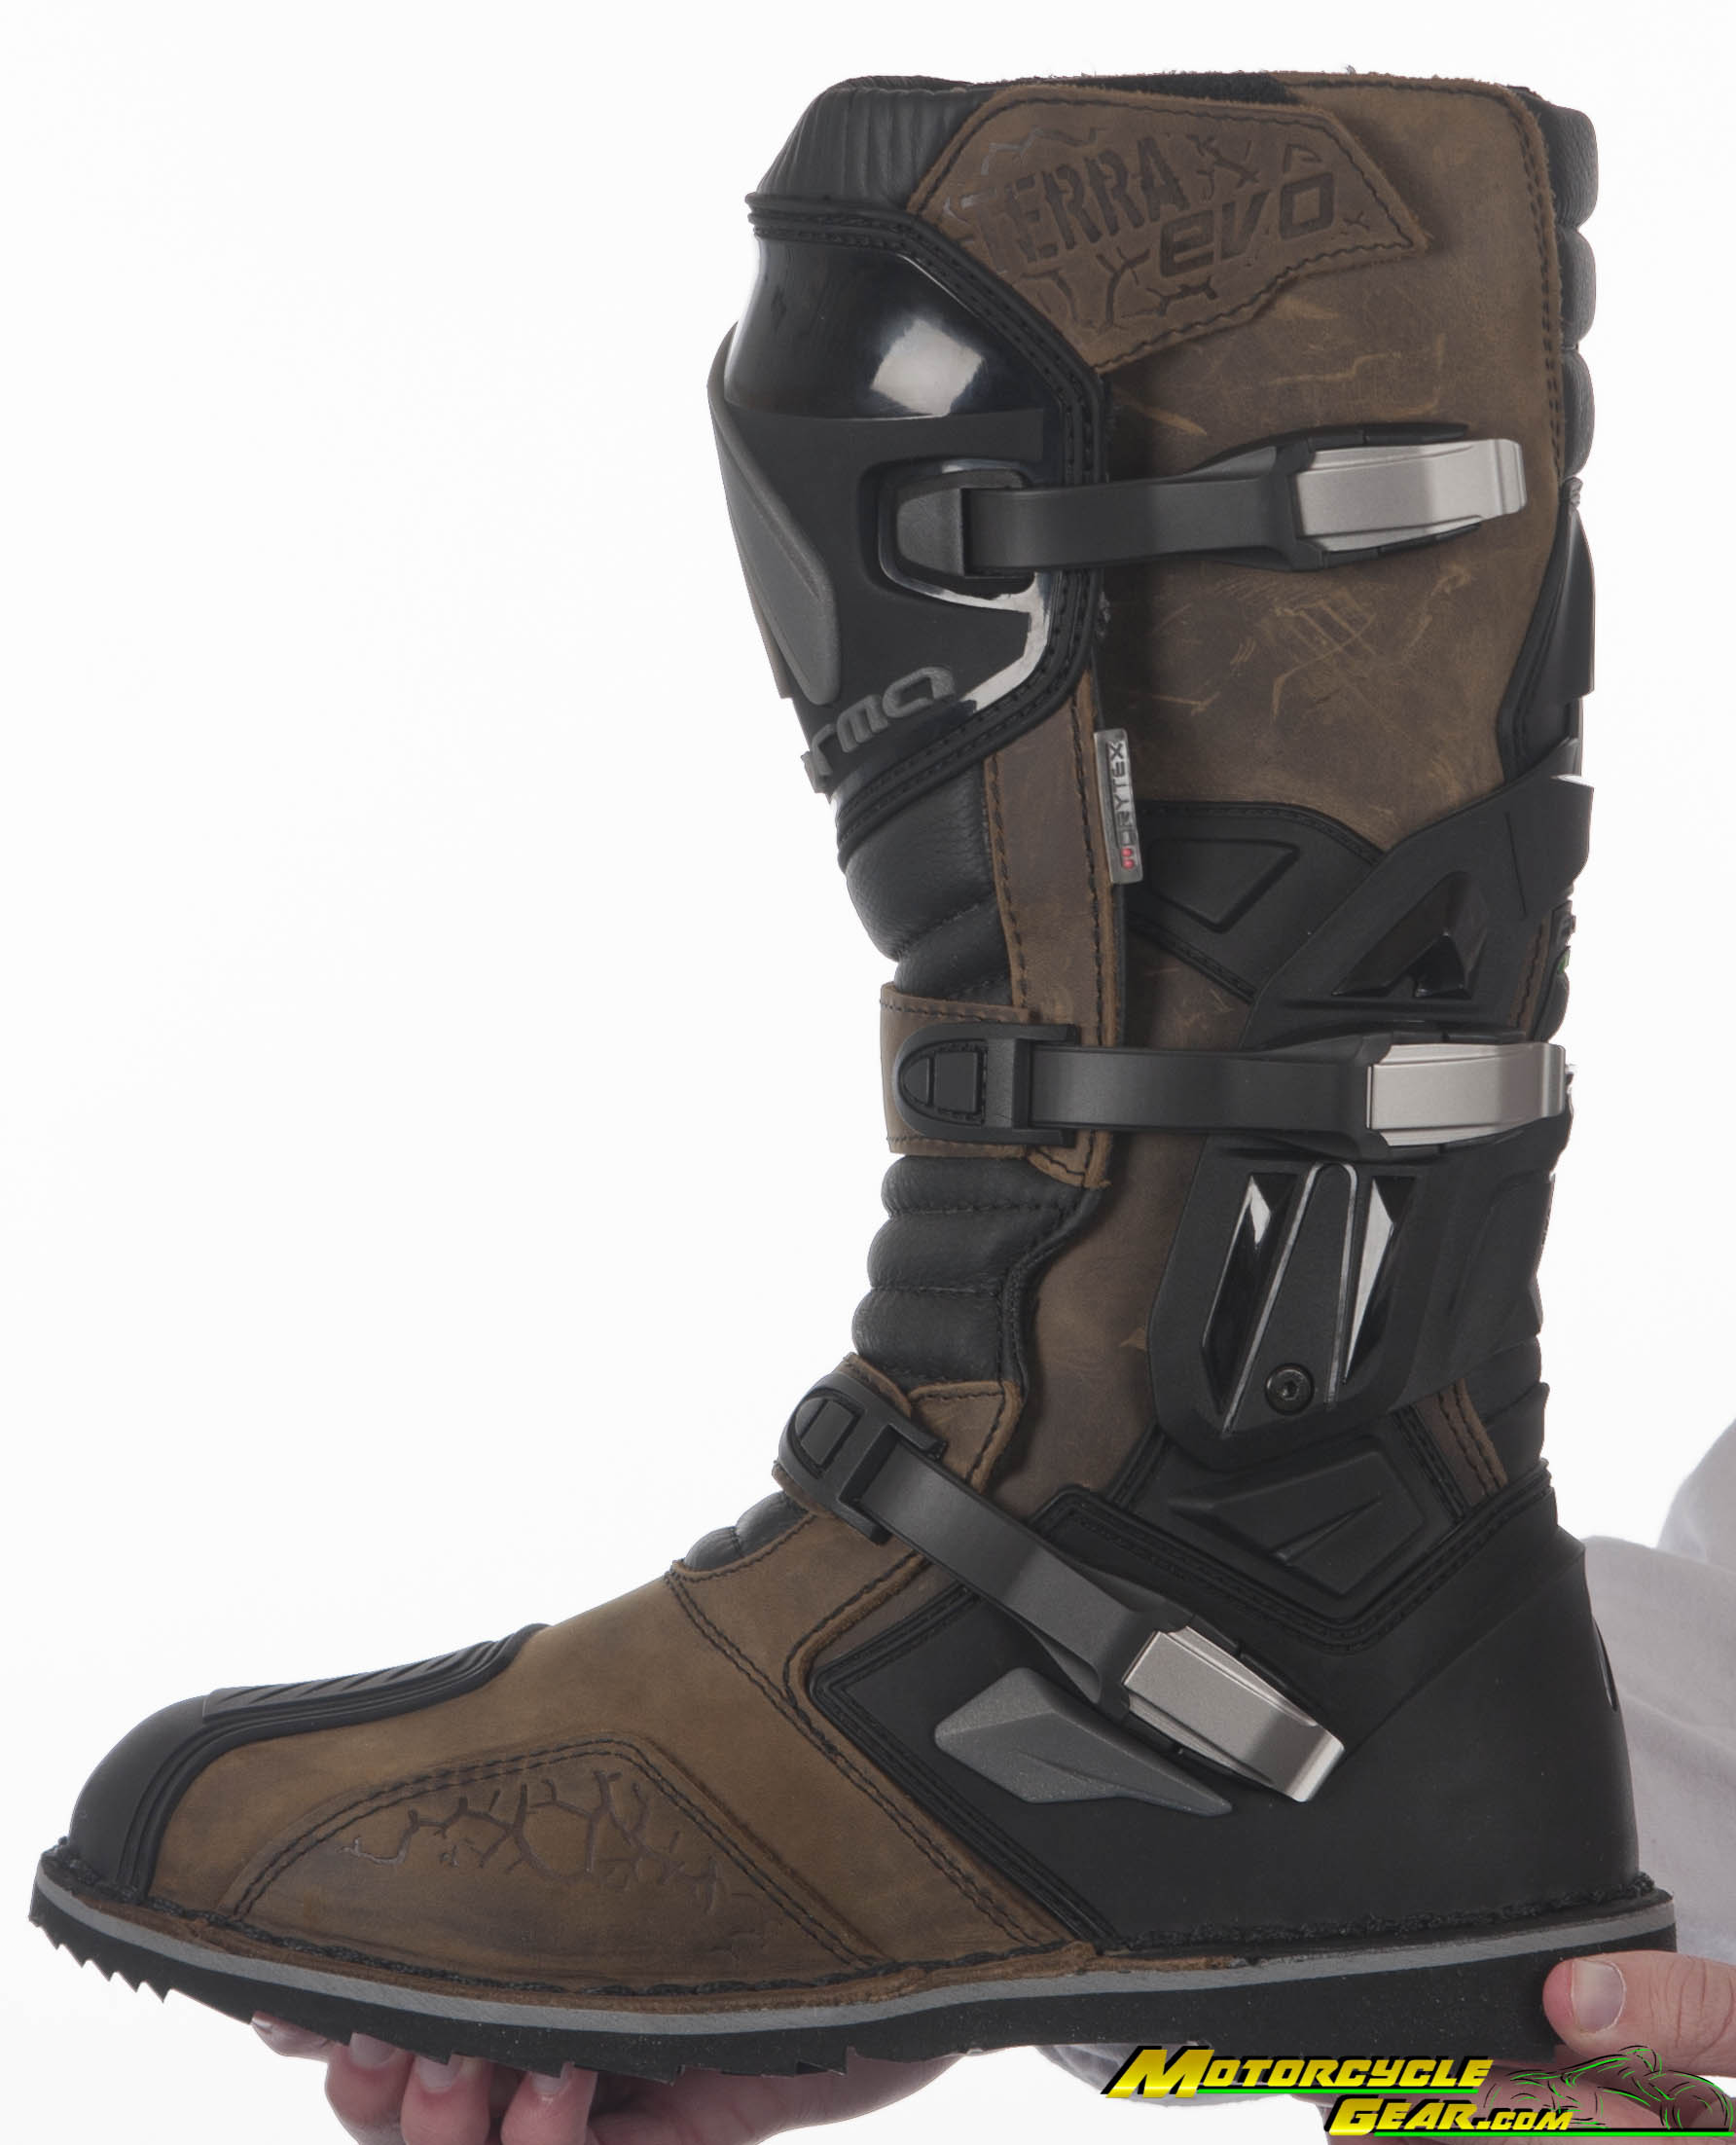 Viewing Images For Forma Terra Evo Dry Boot :: MotorcycleGear.com